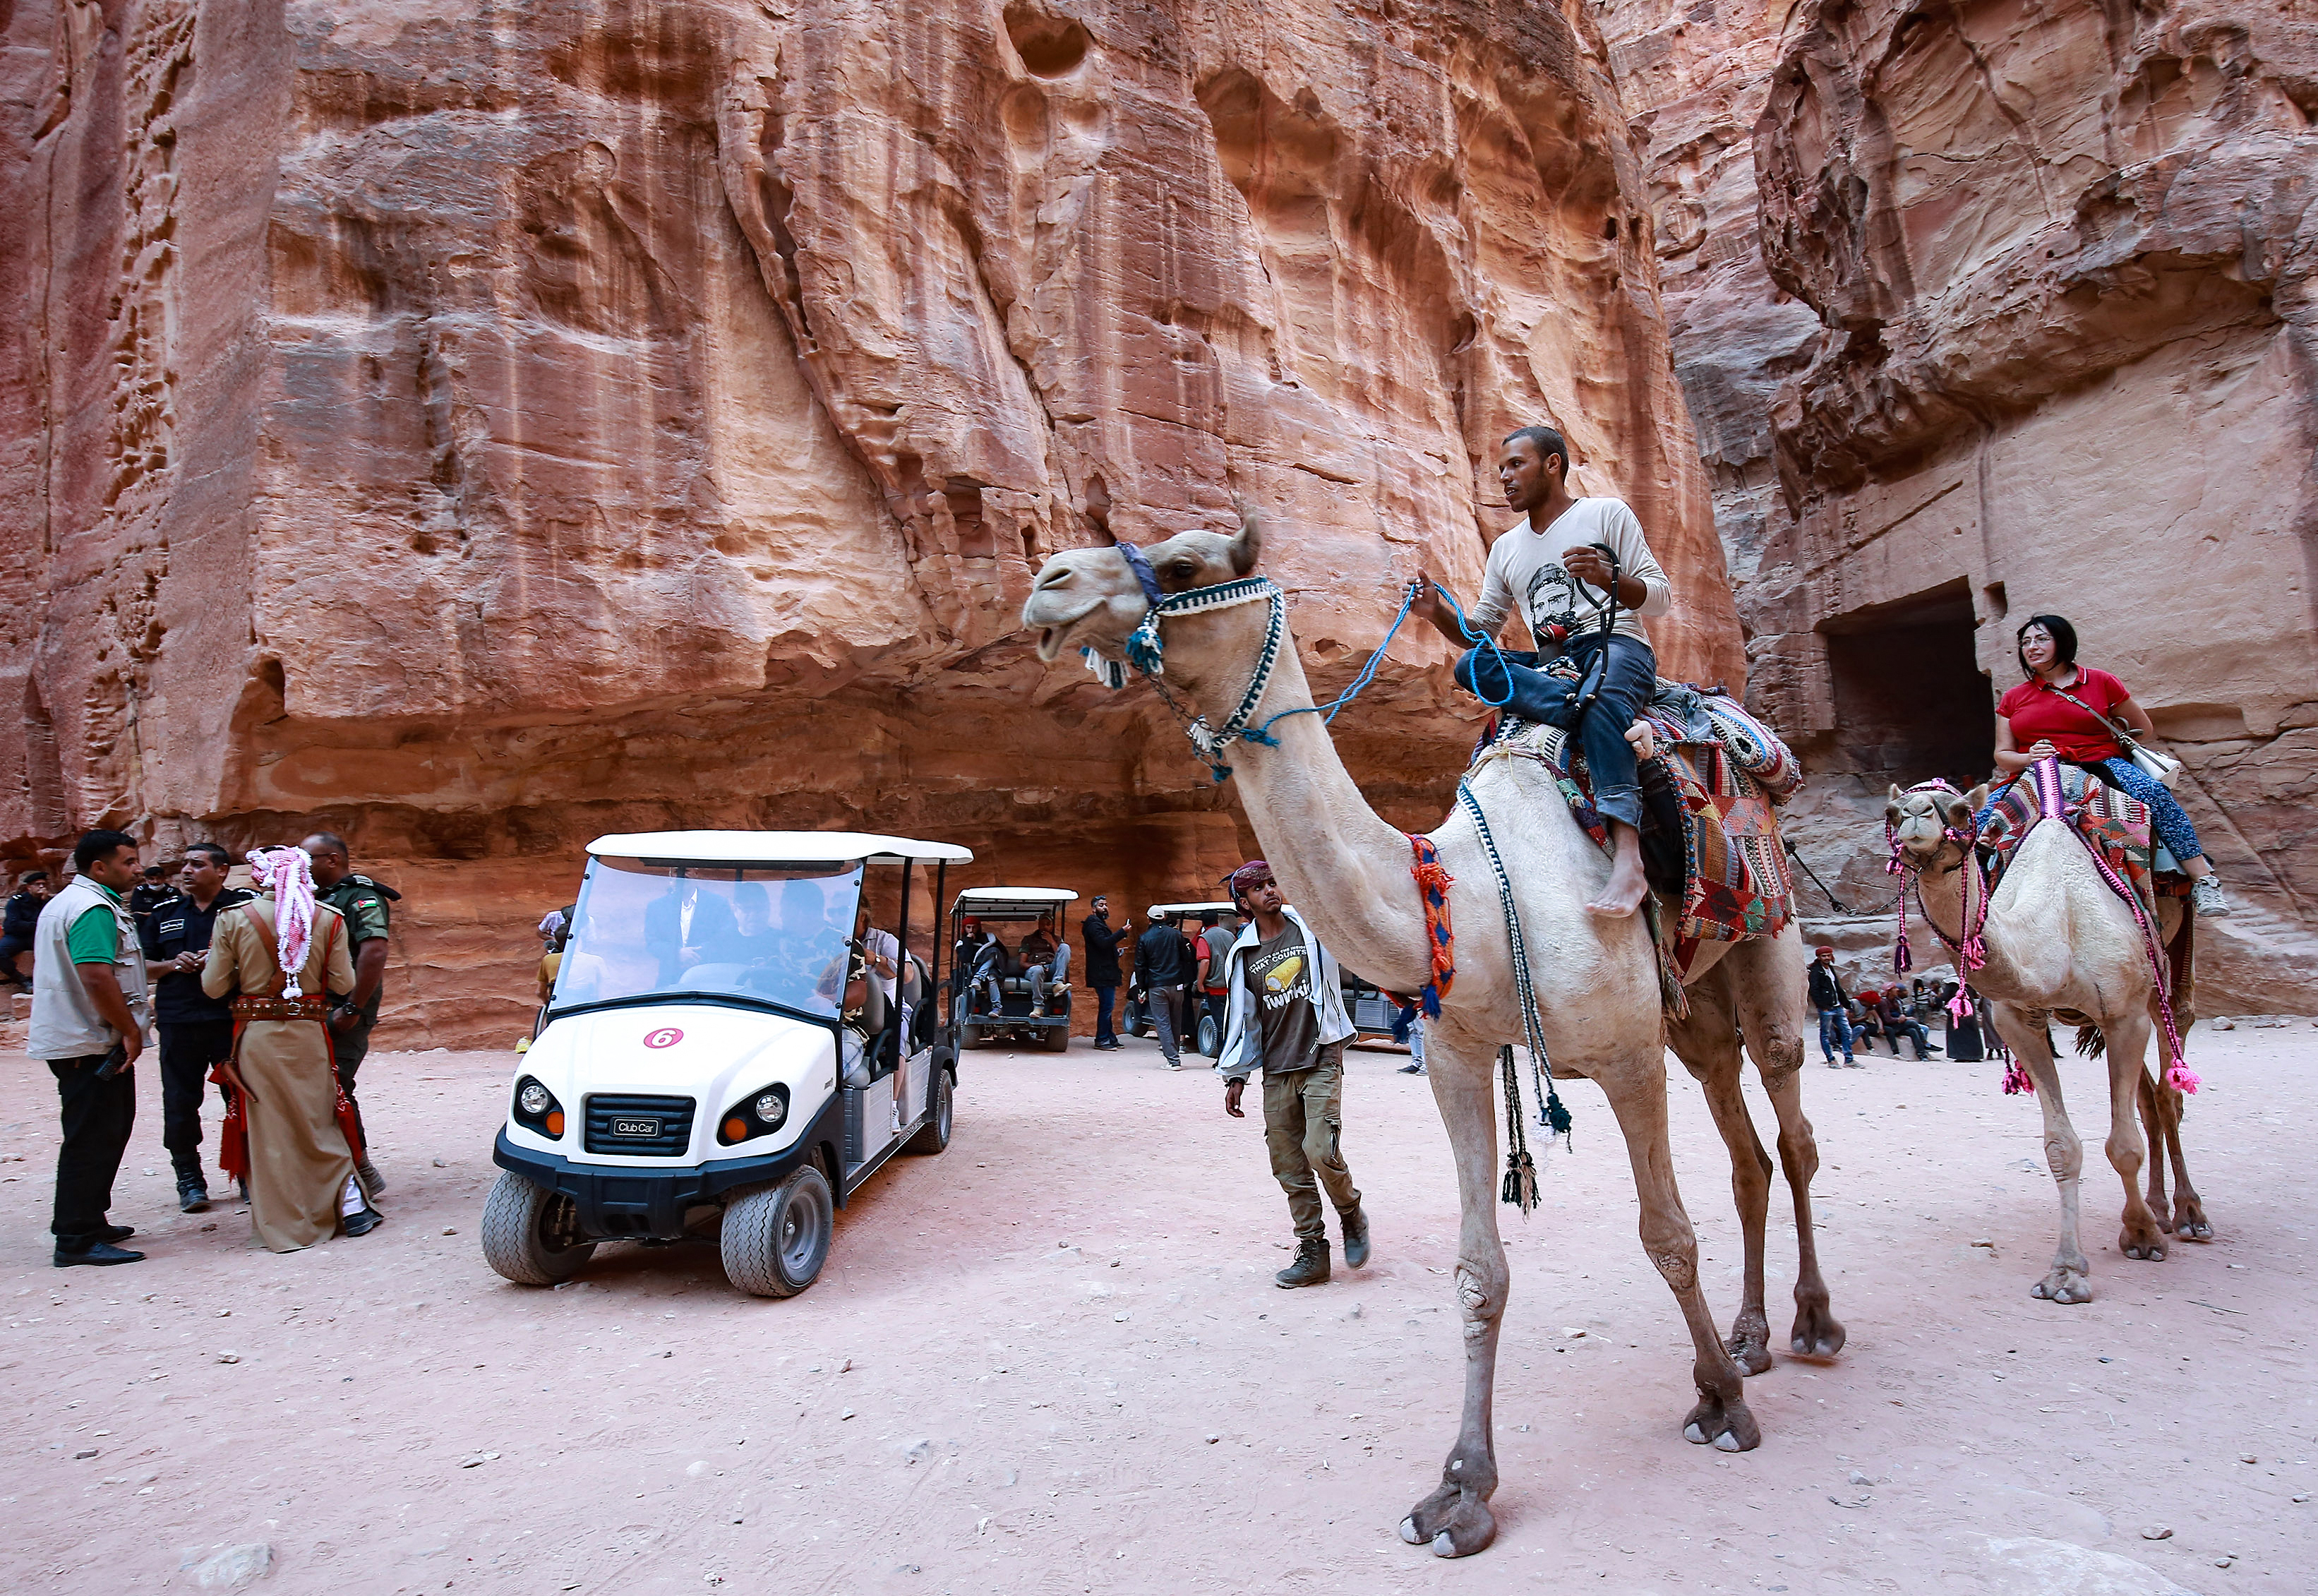 Tourists ride camels and others an electric cart, during their trip to Jordan‘s famed ancient city of Petra, some 230km (143 miles) south of the capital Amman, on 27 October 2021 (photo: Khalil Mazraawi/AFP) -